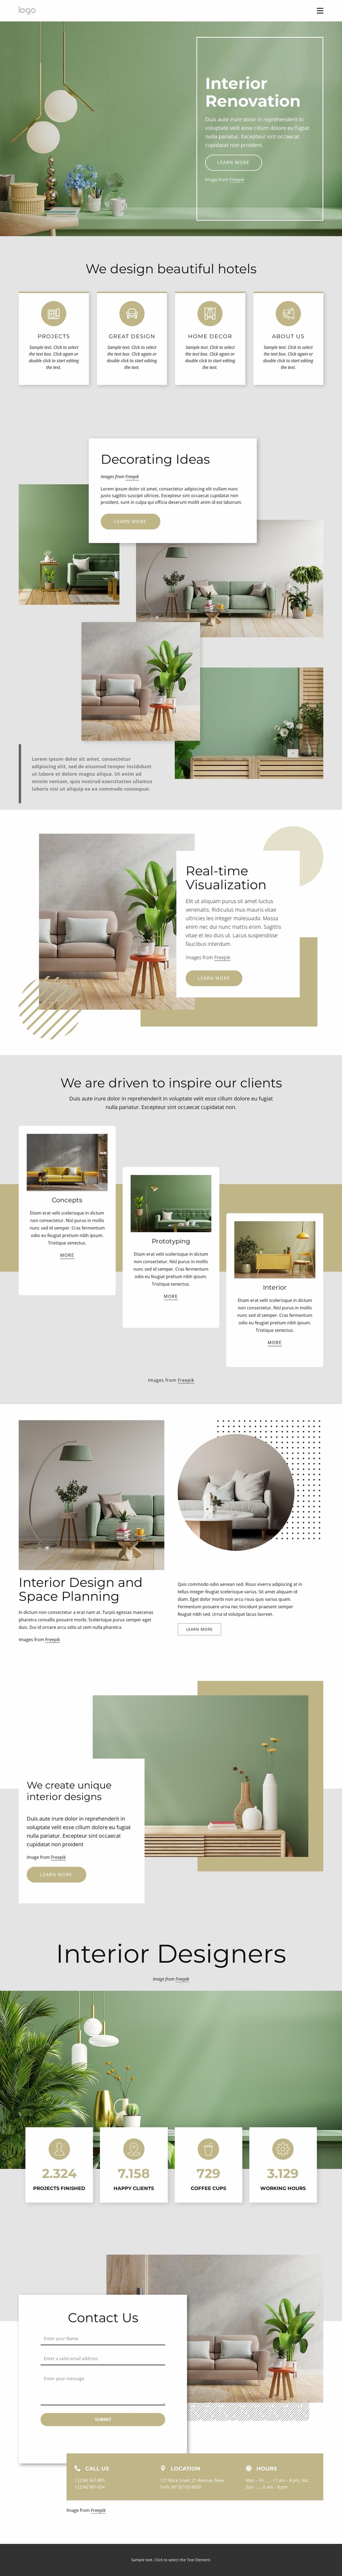 Architecture and interior design agency Website Template